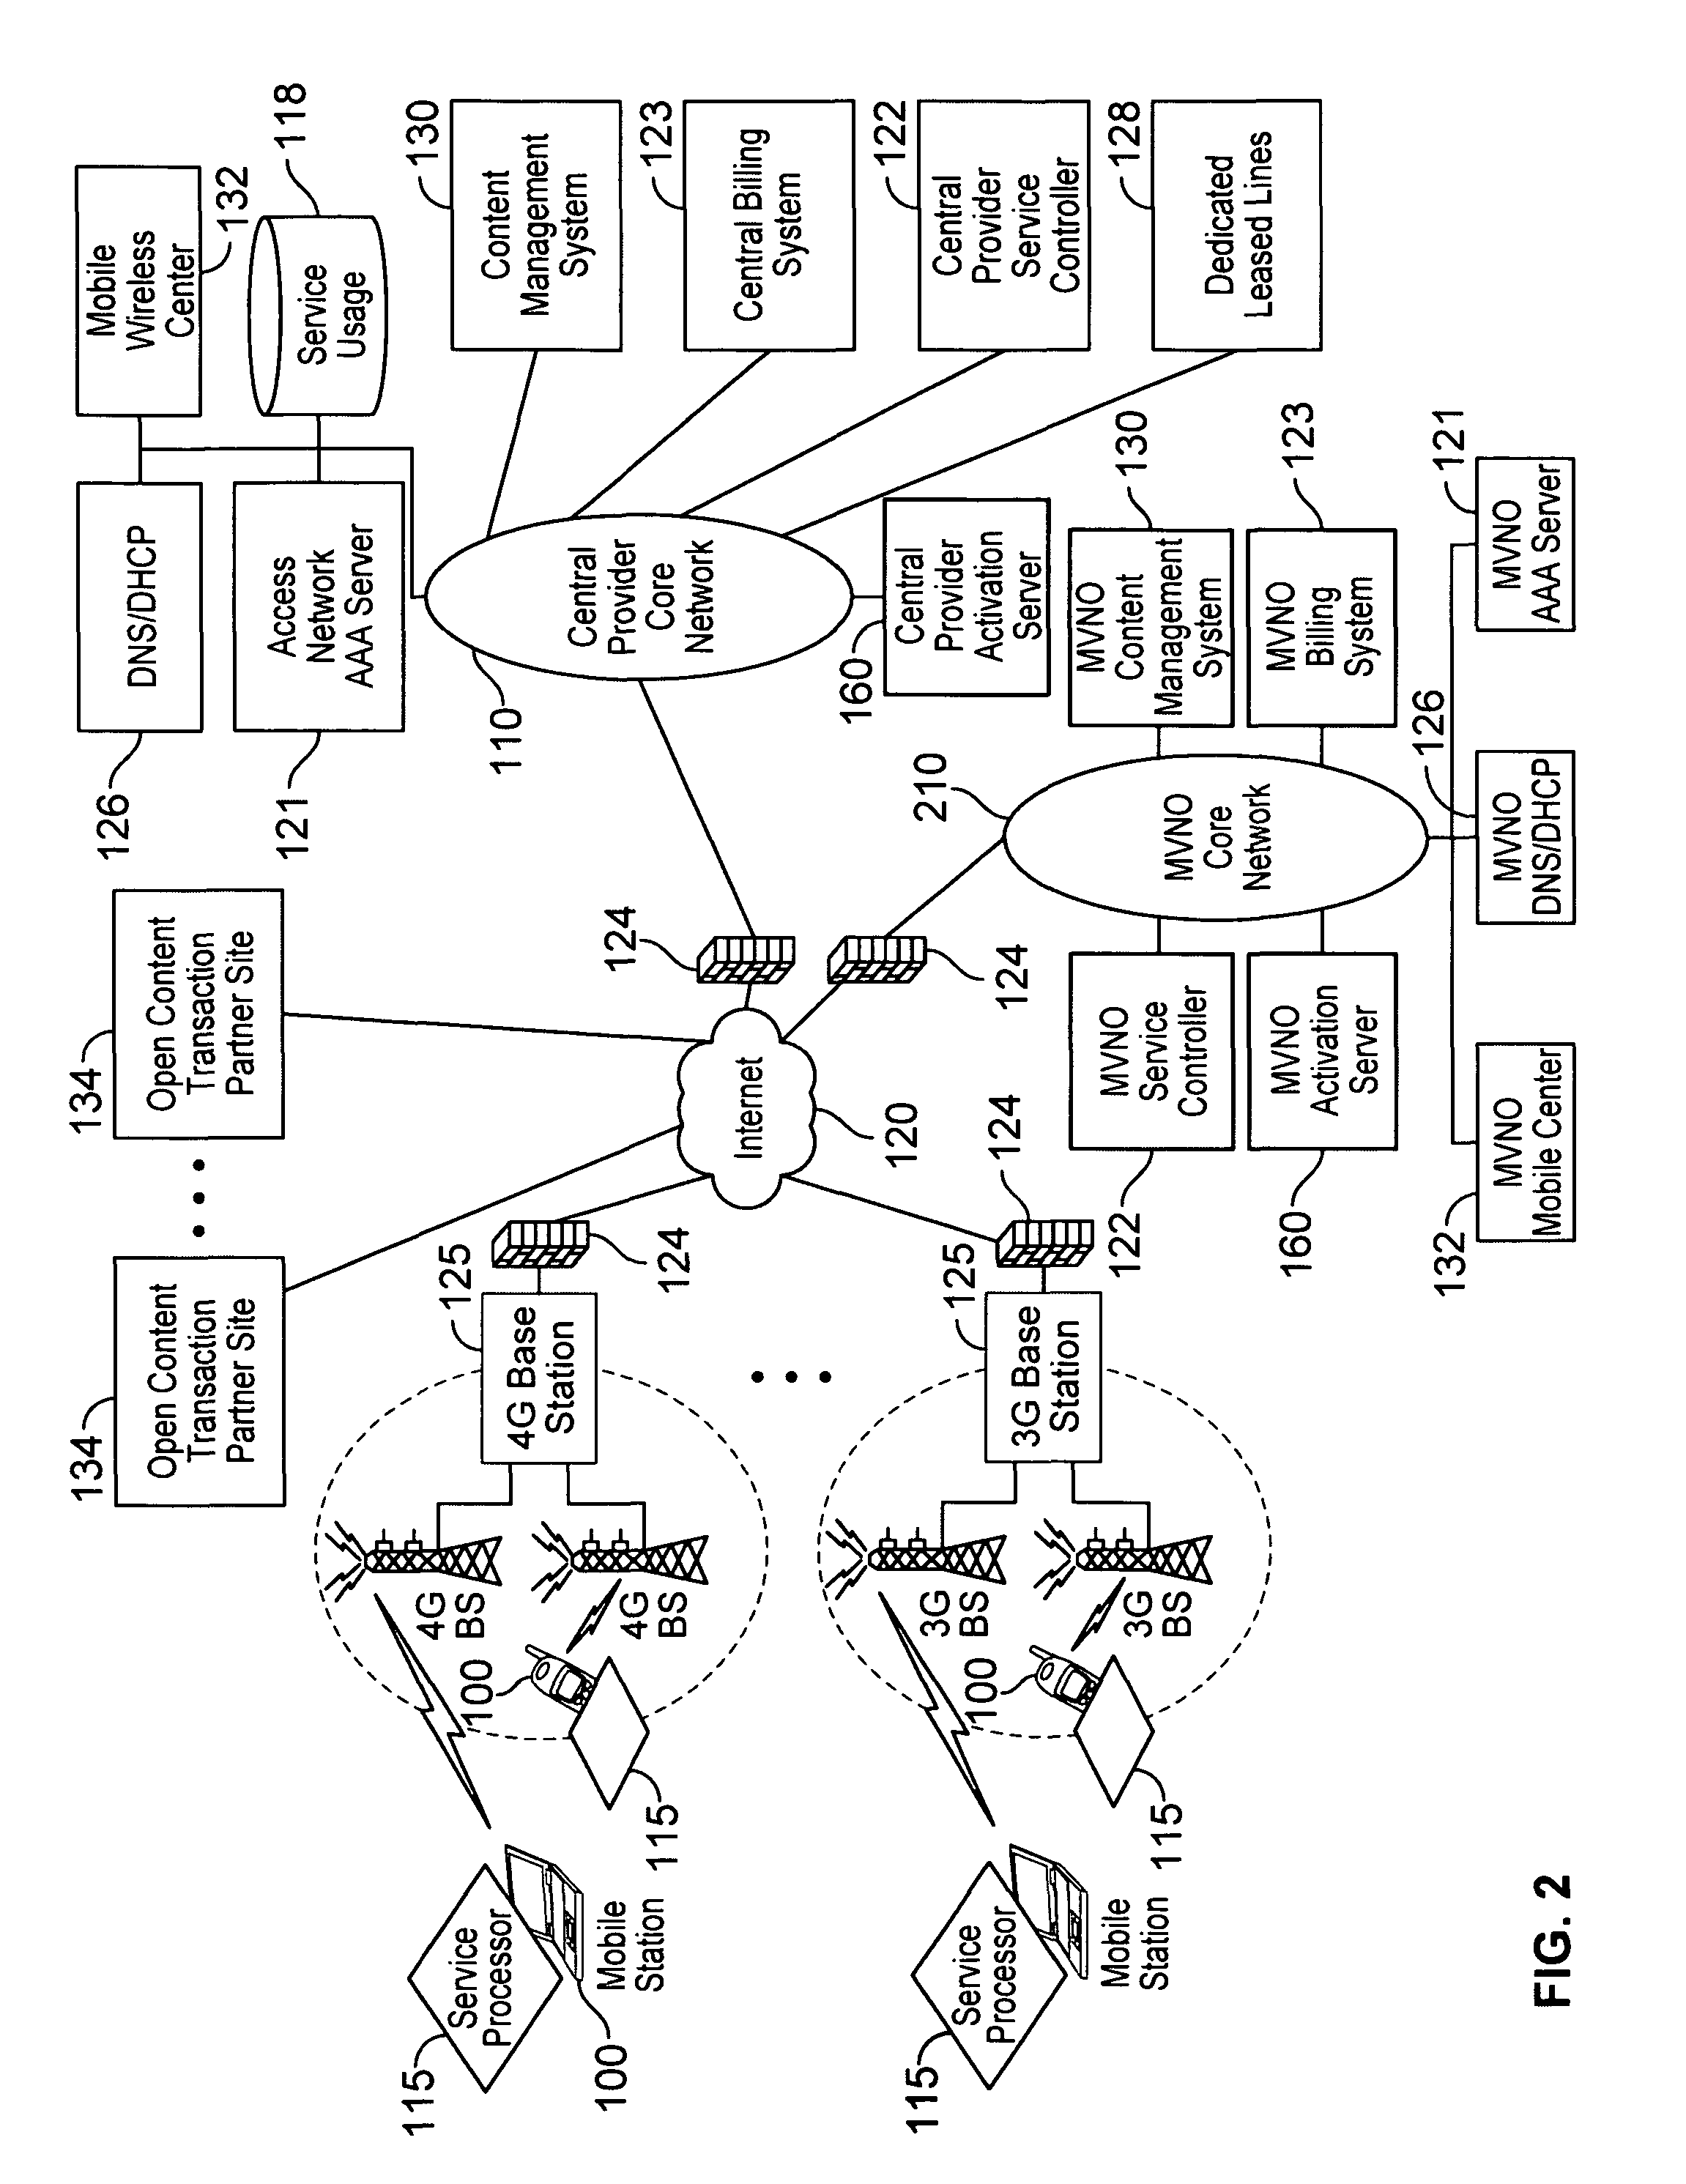 Verifiable service billing for intermediate networking devices